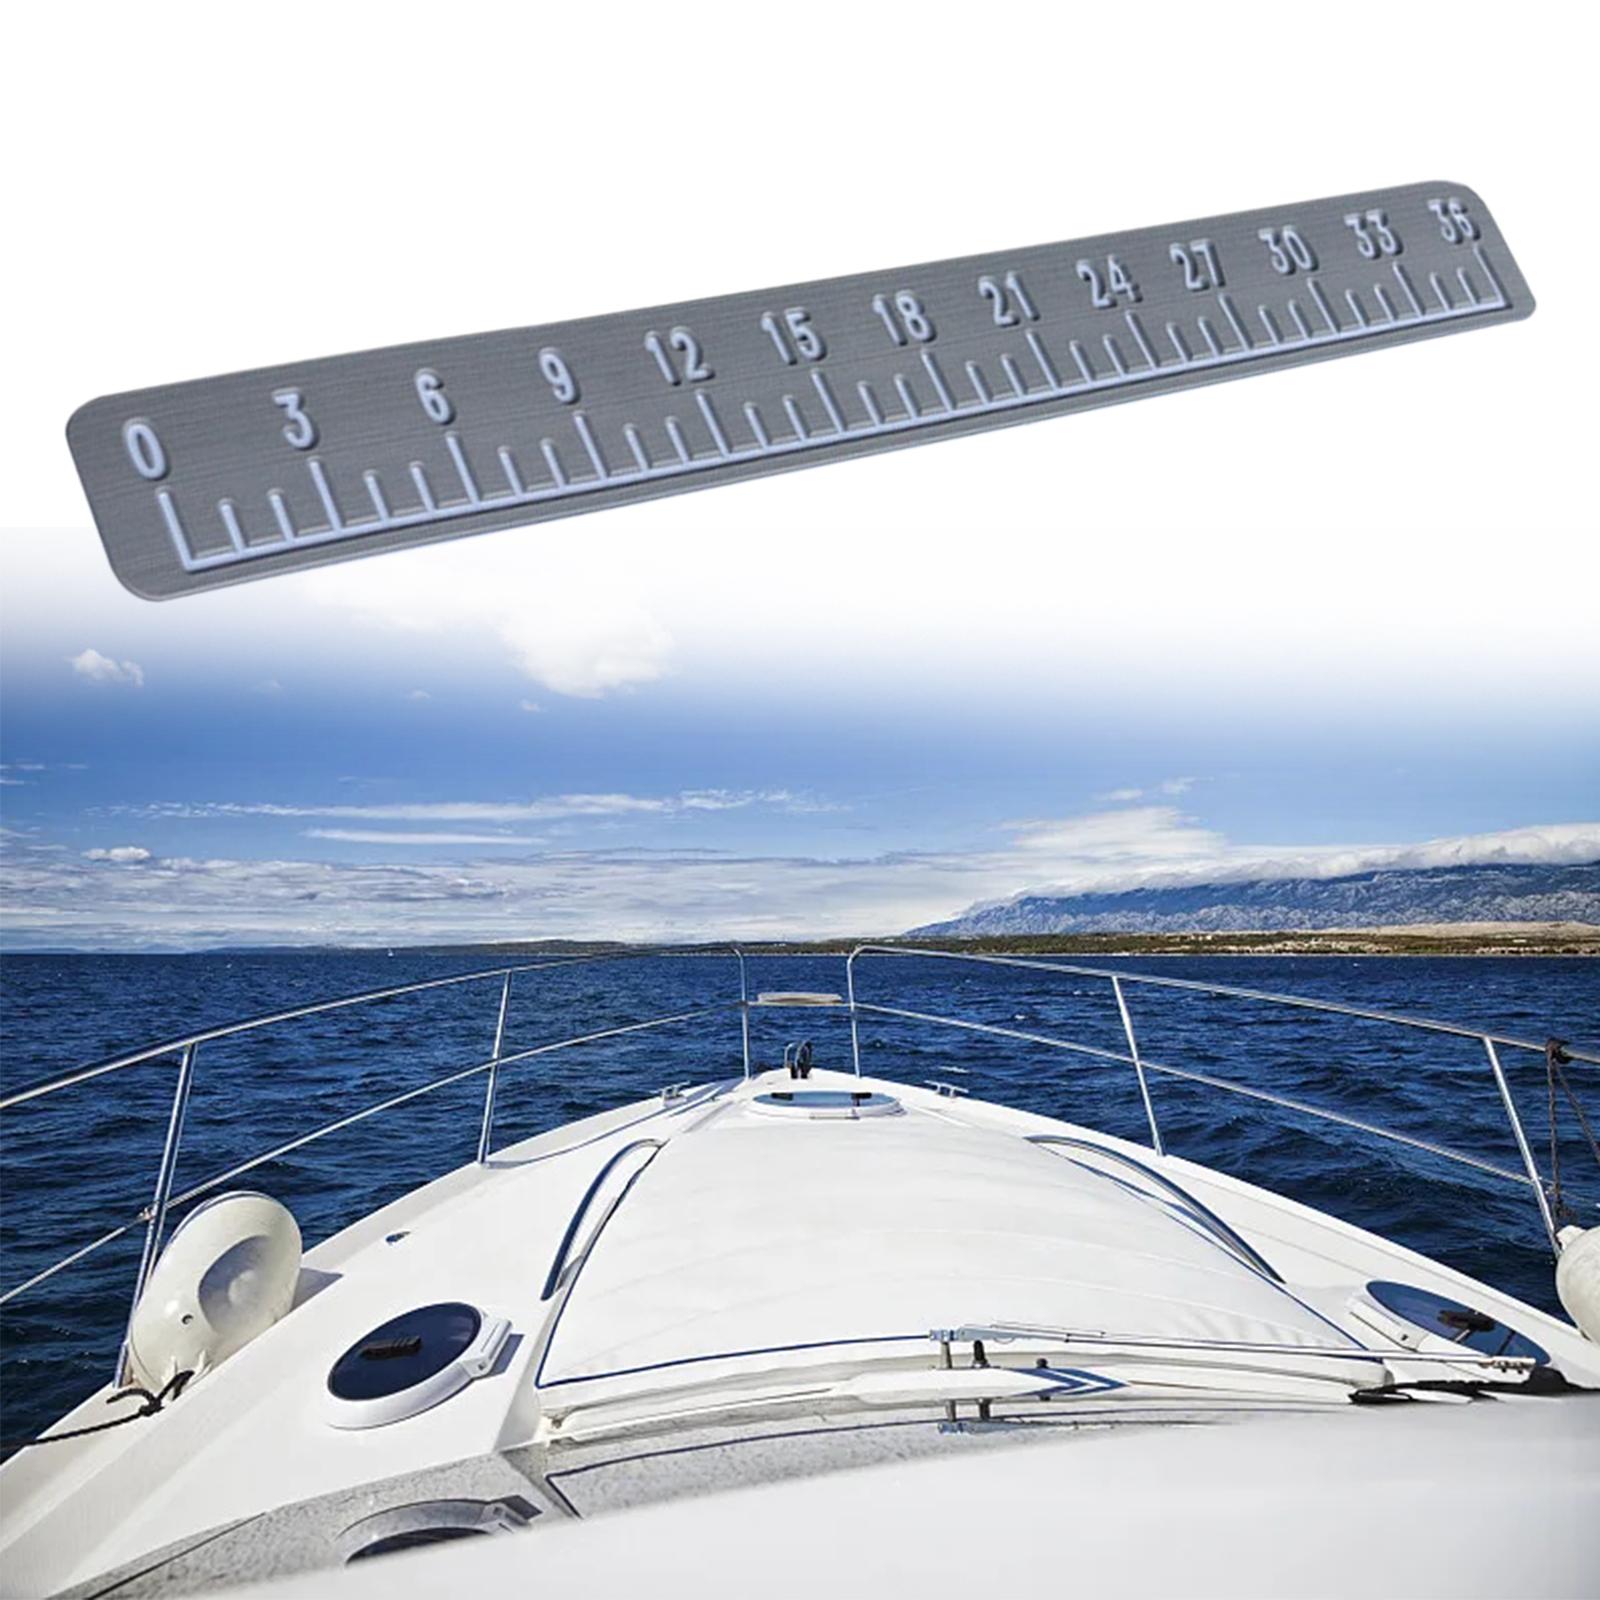 39" Fish Ruler for Boat Accurate 6mm Thickness High Density for Sailboats light gray white